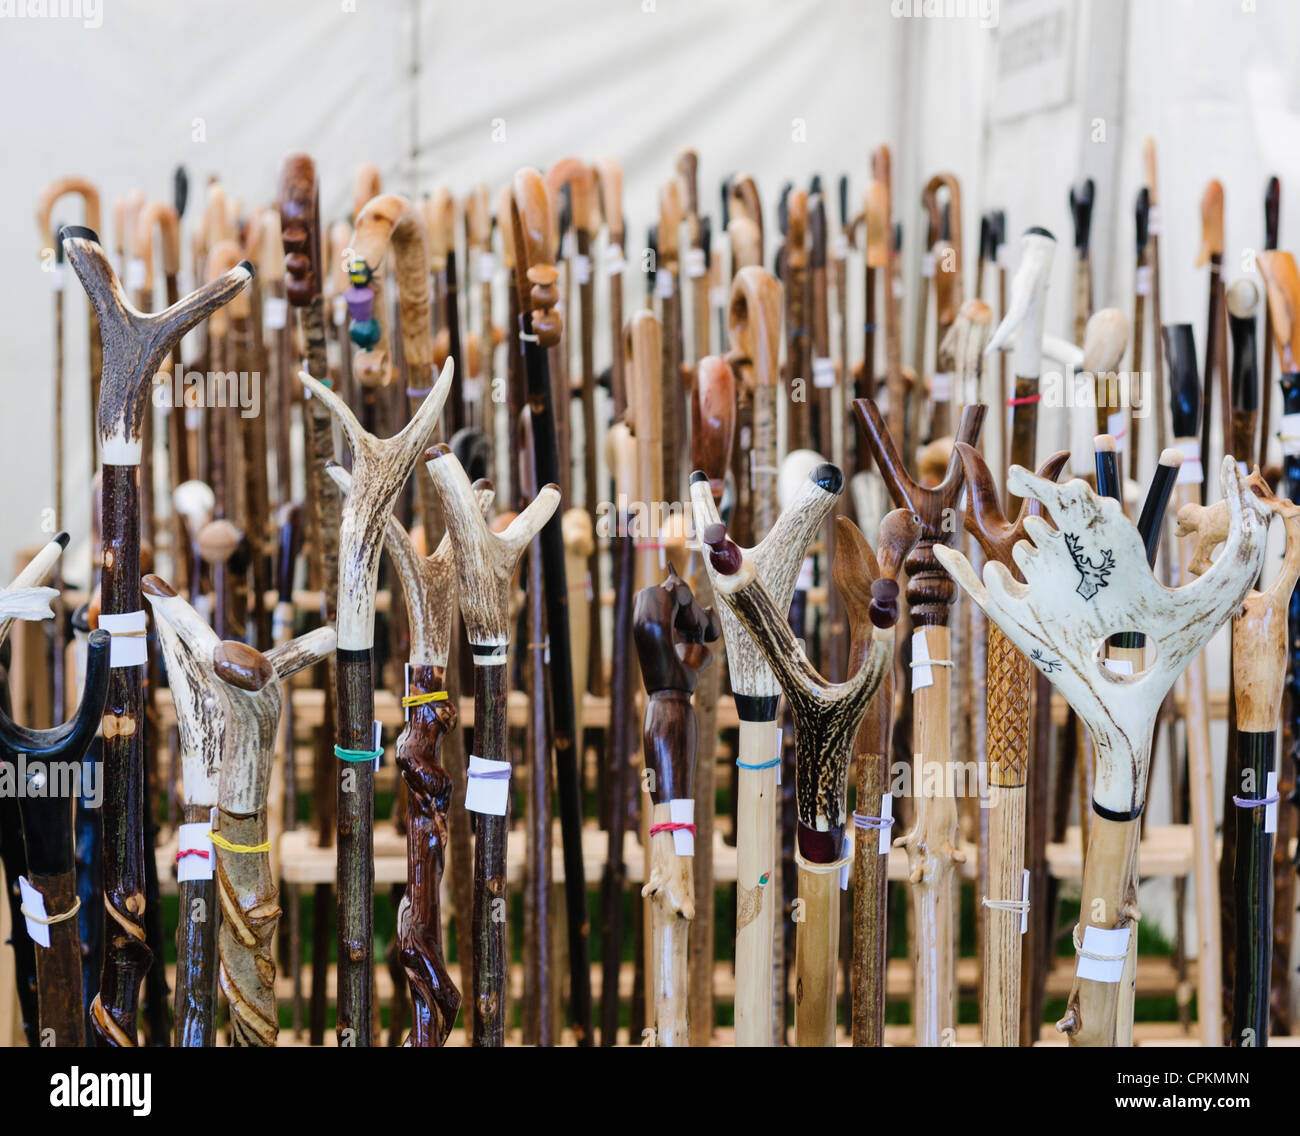 Selection of walking sticks for sale Stock Photo